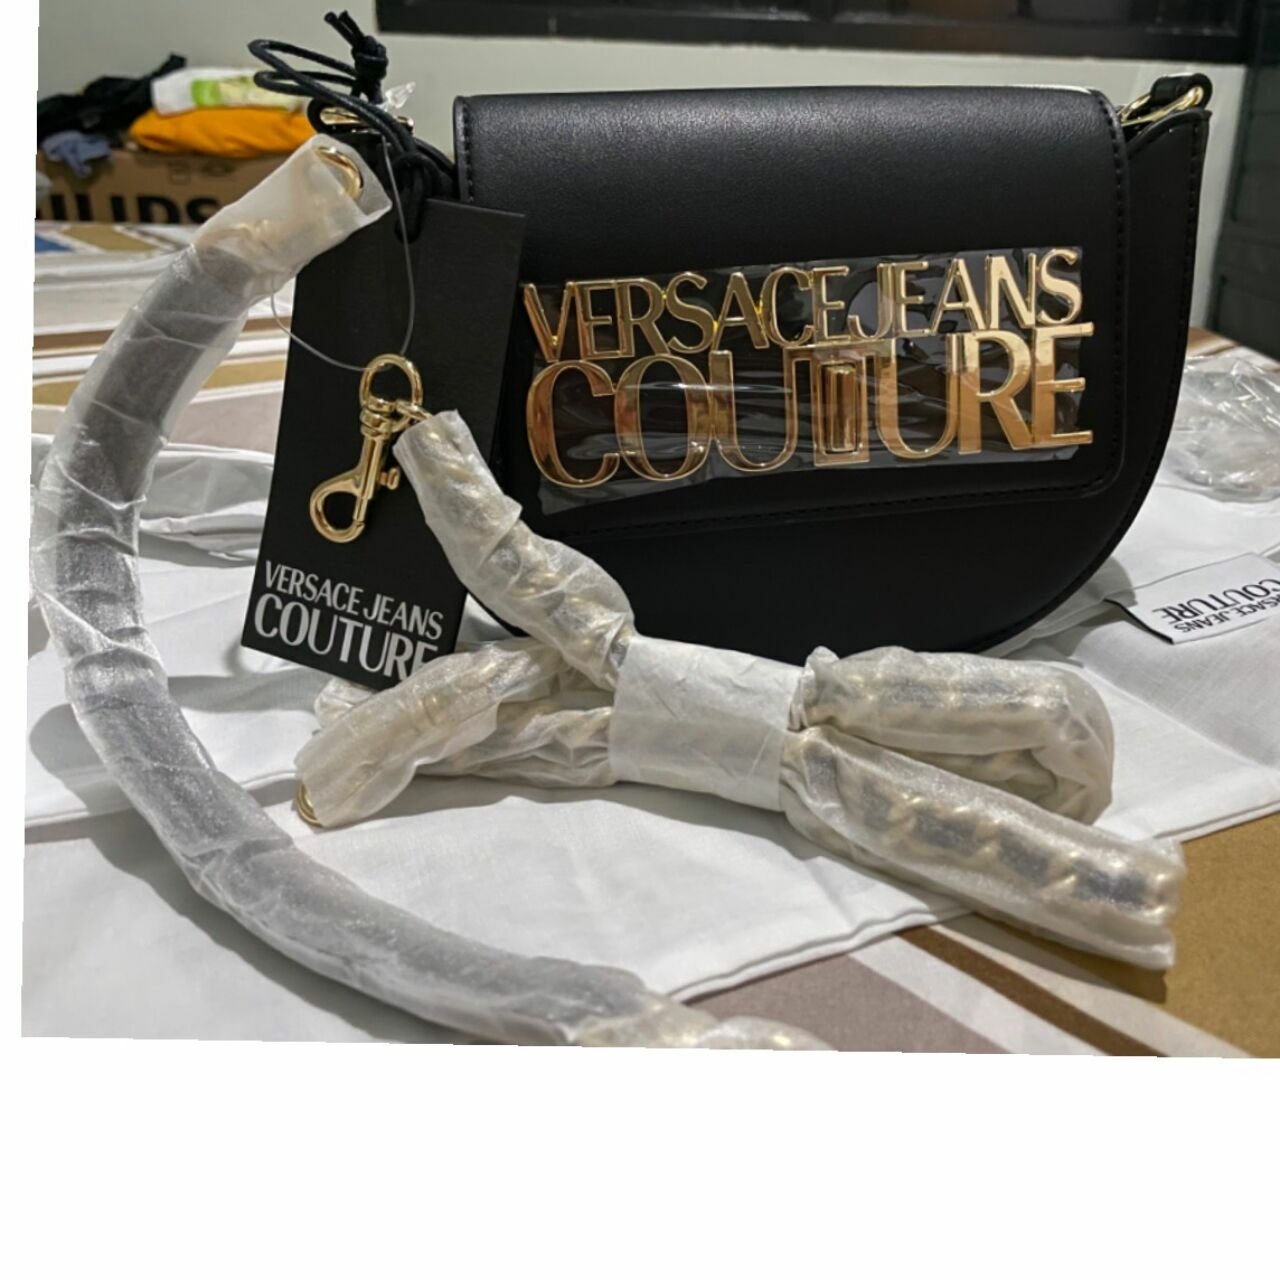 Versace Jeans Couture Black Sling Bag